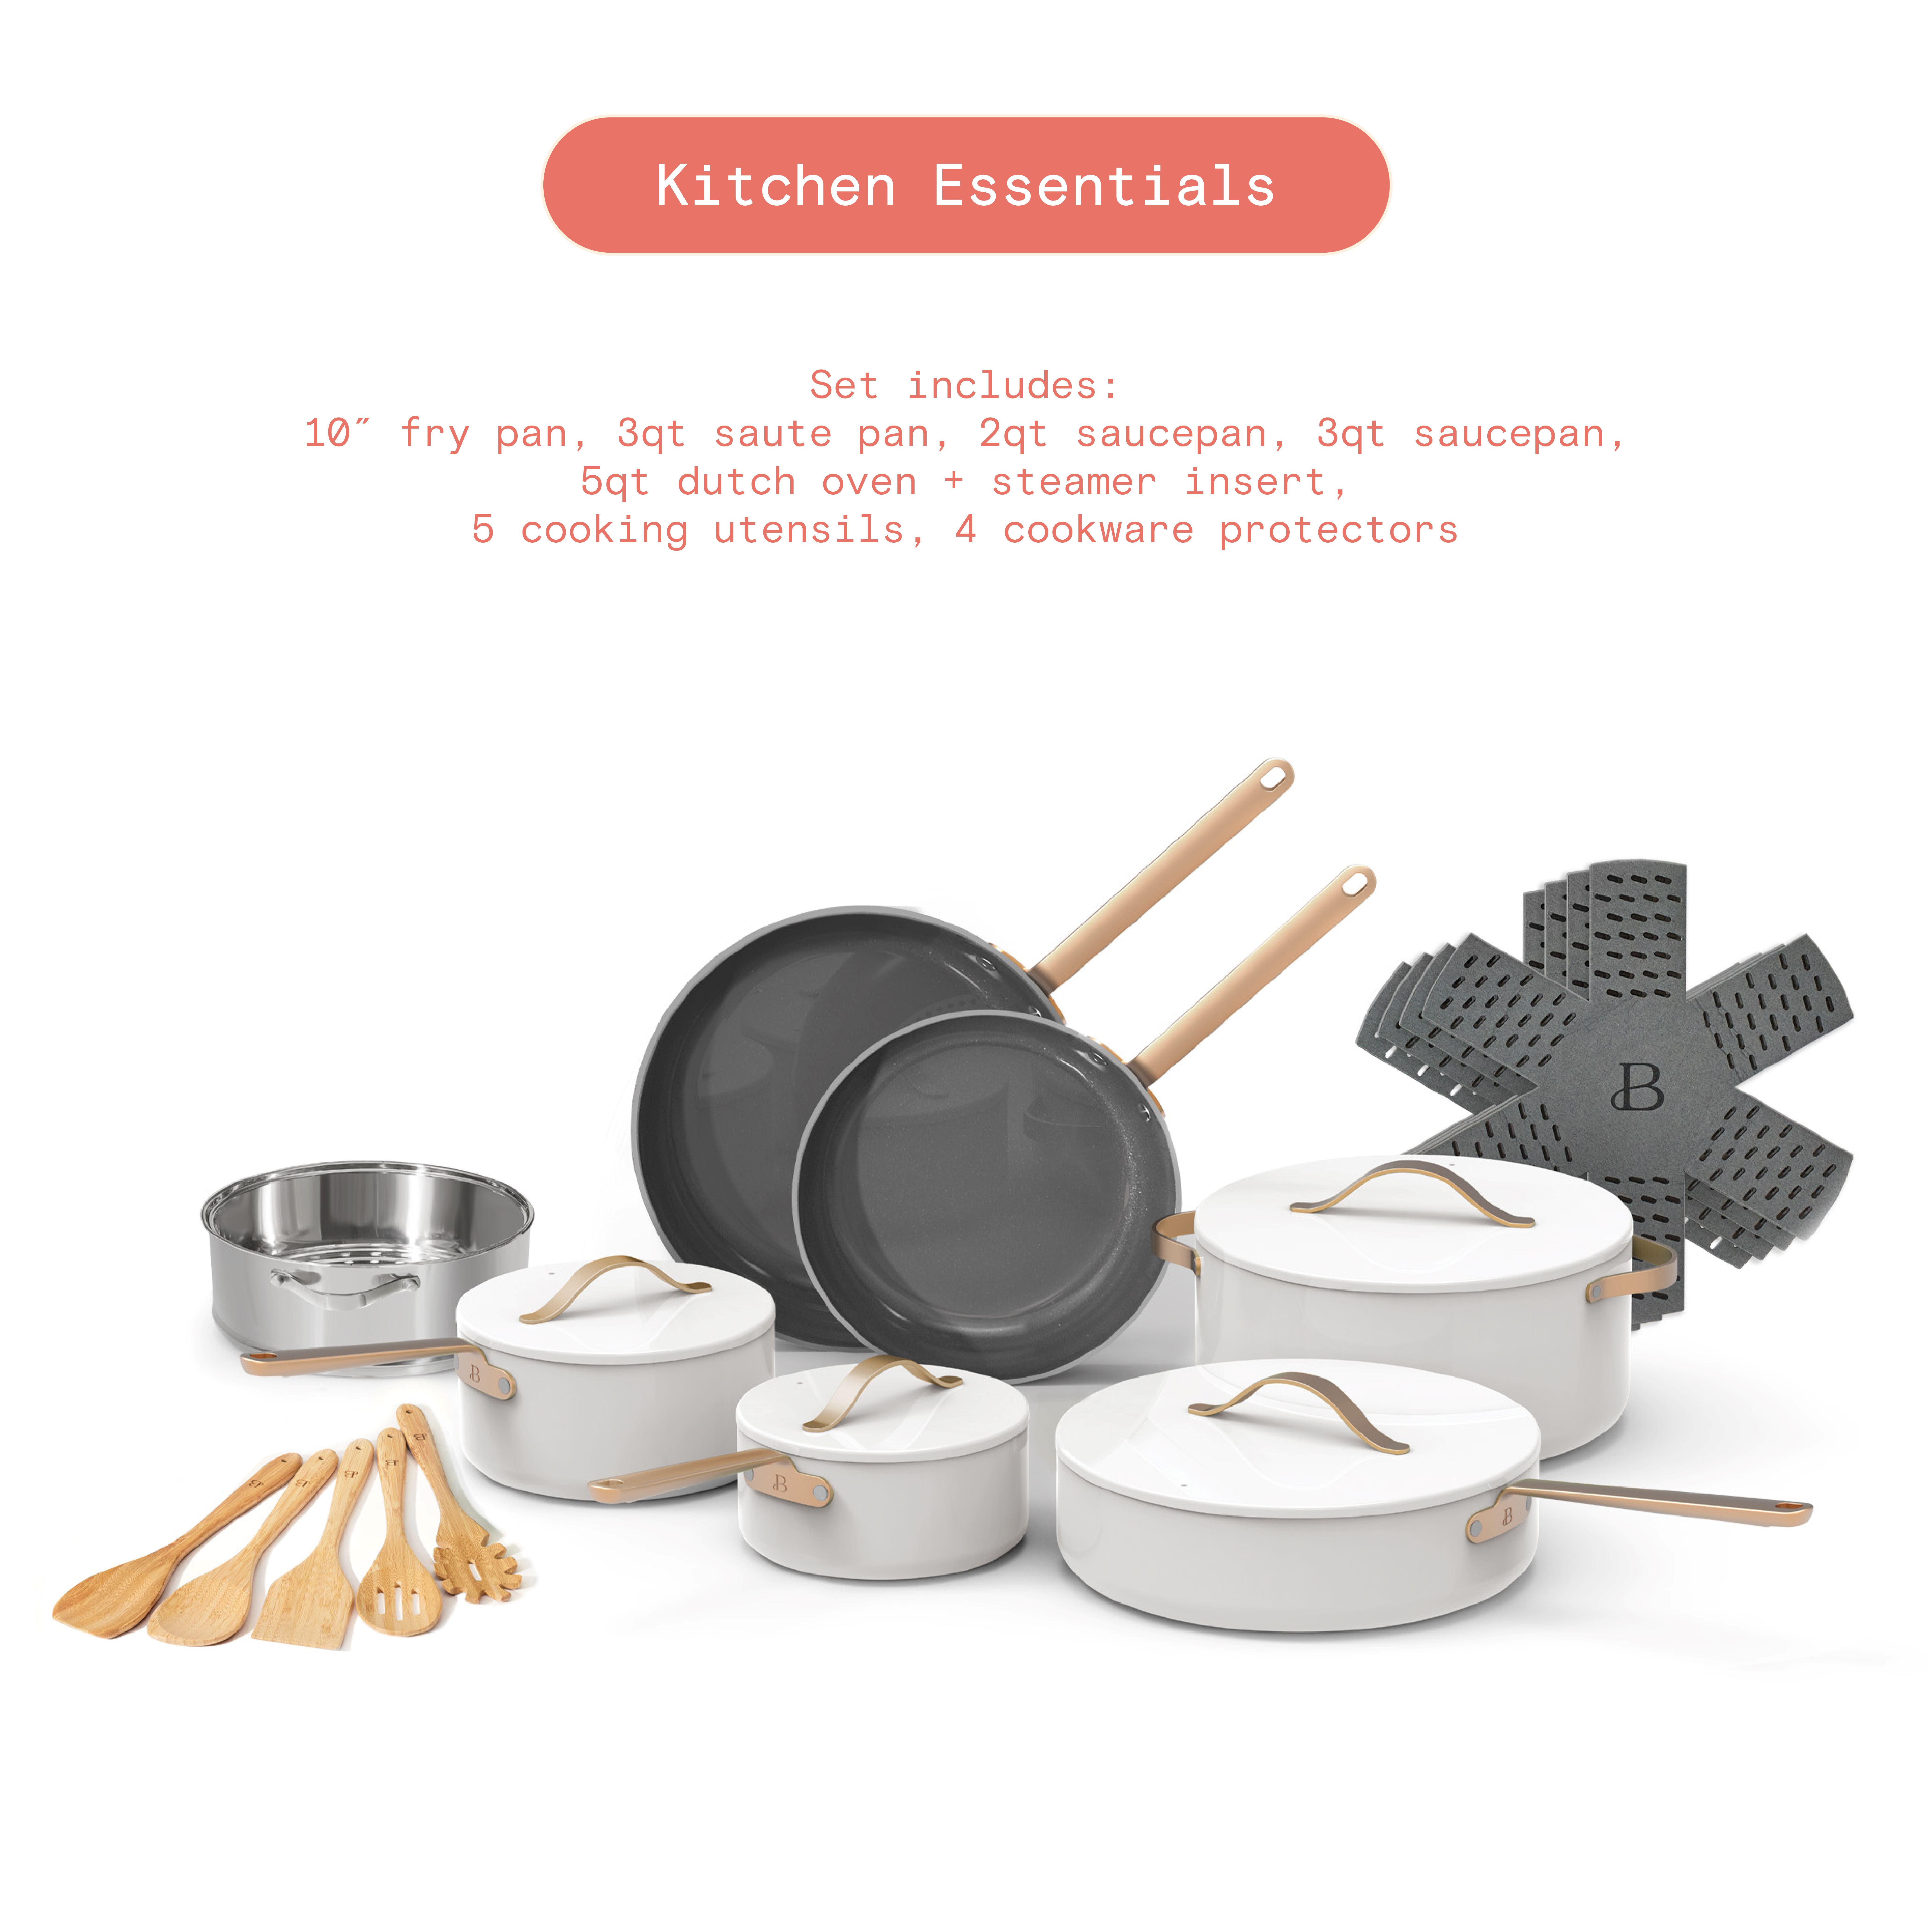 Beautiful 20pc Ceramic Non-Stick Cookware Set, White Icing by Drew Barrymore - image 4 of 7